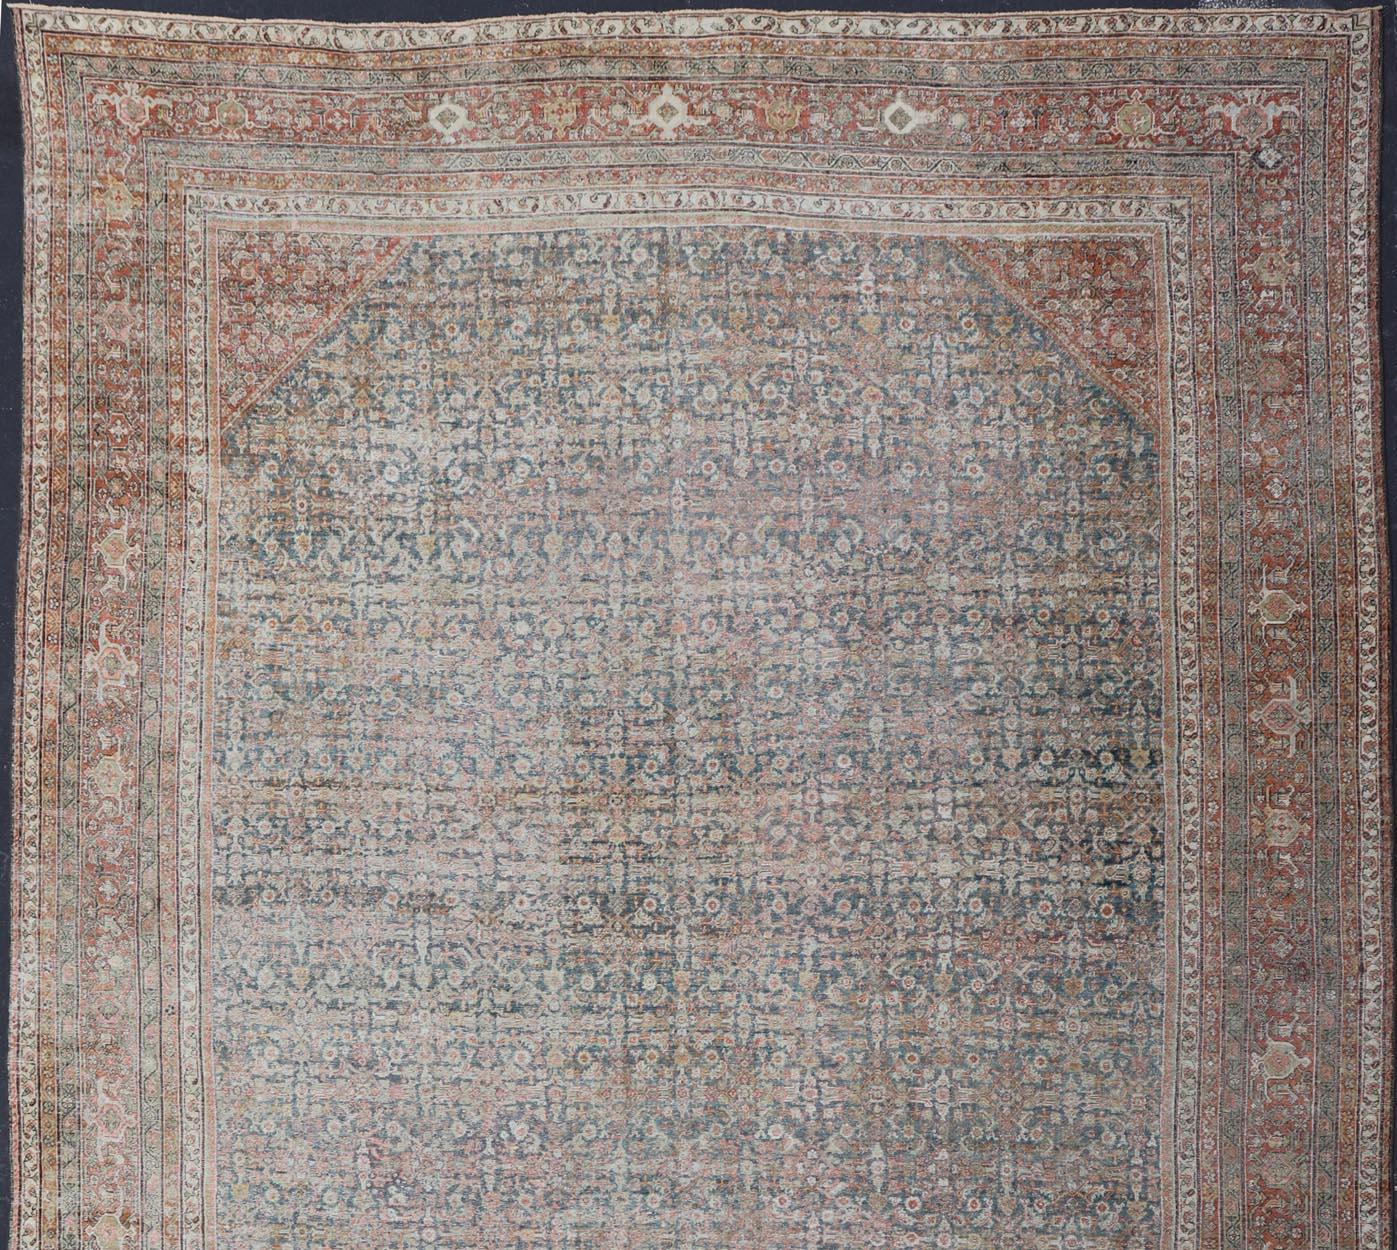 This impressive antique distressed Persian Sultanabad rug features a superb all-over Herati and sub-geometric design throughout the entirety of the piece. The entire body is enclosed by complementary, multi-tiered borders. The rug is rendered in